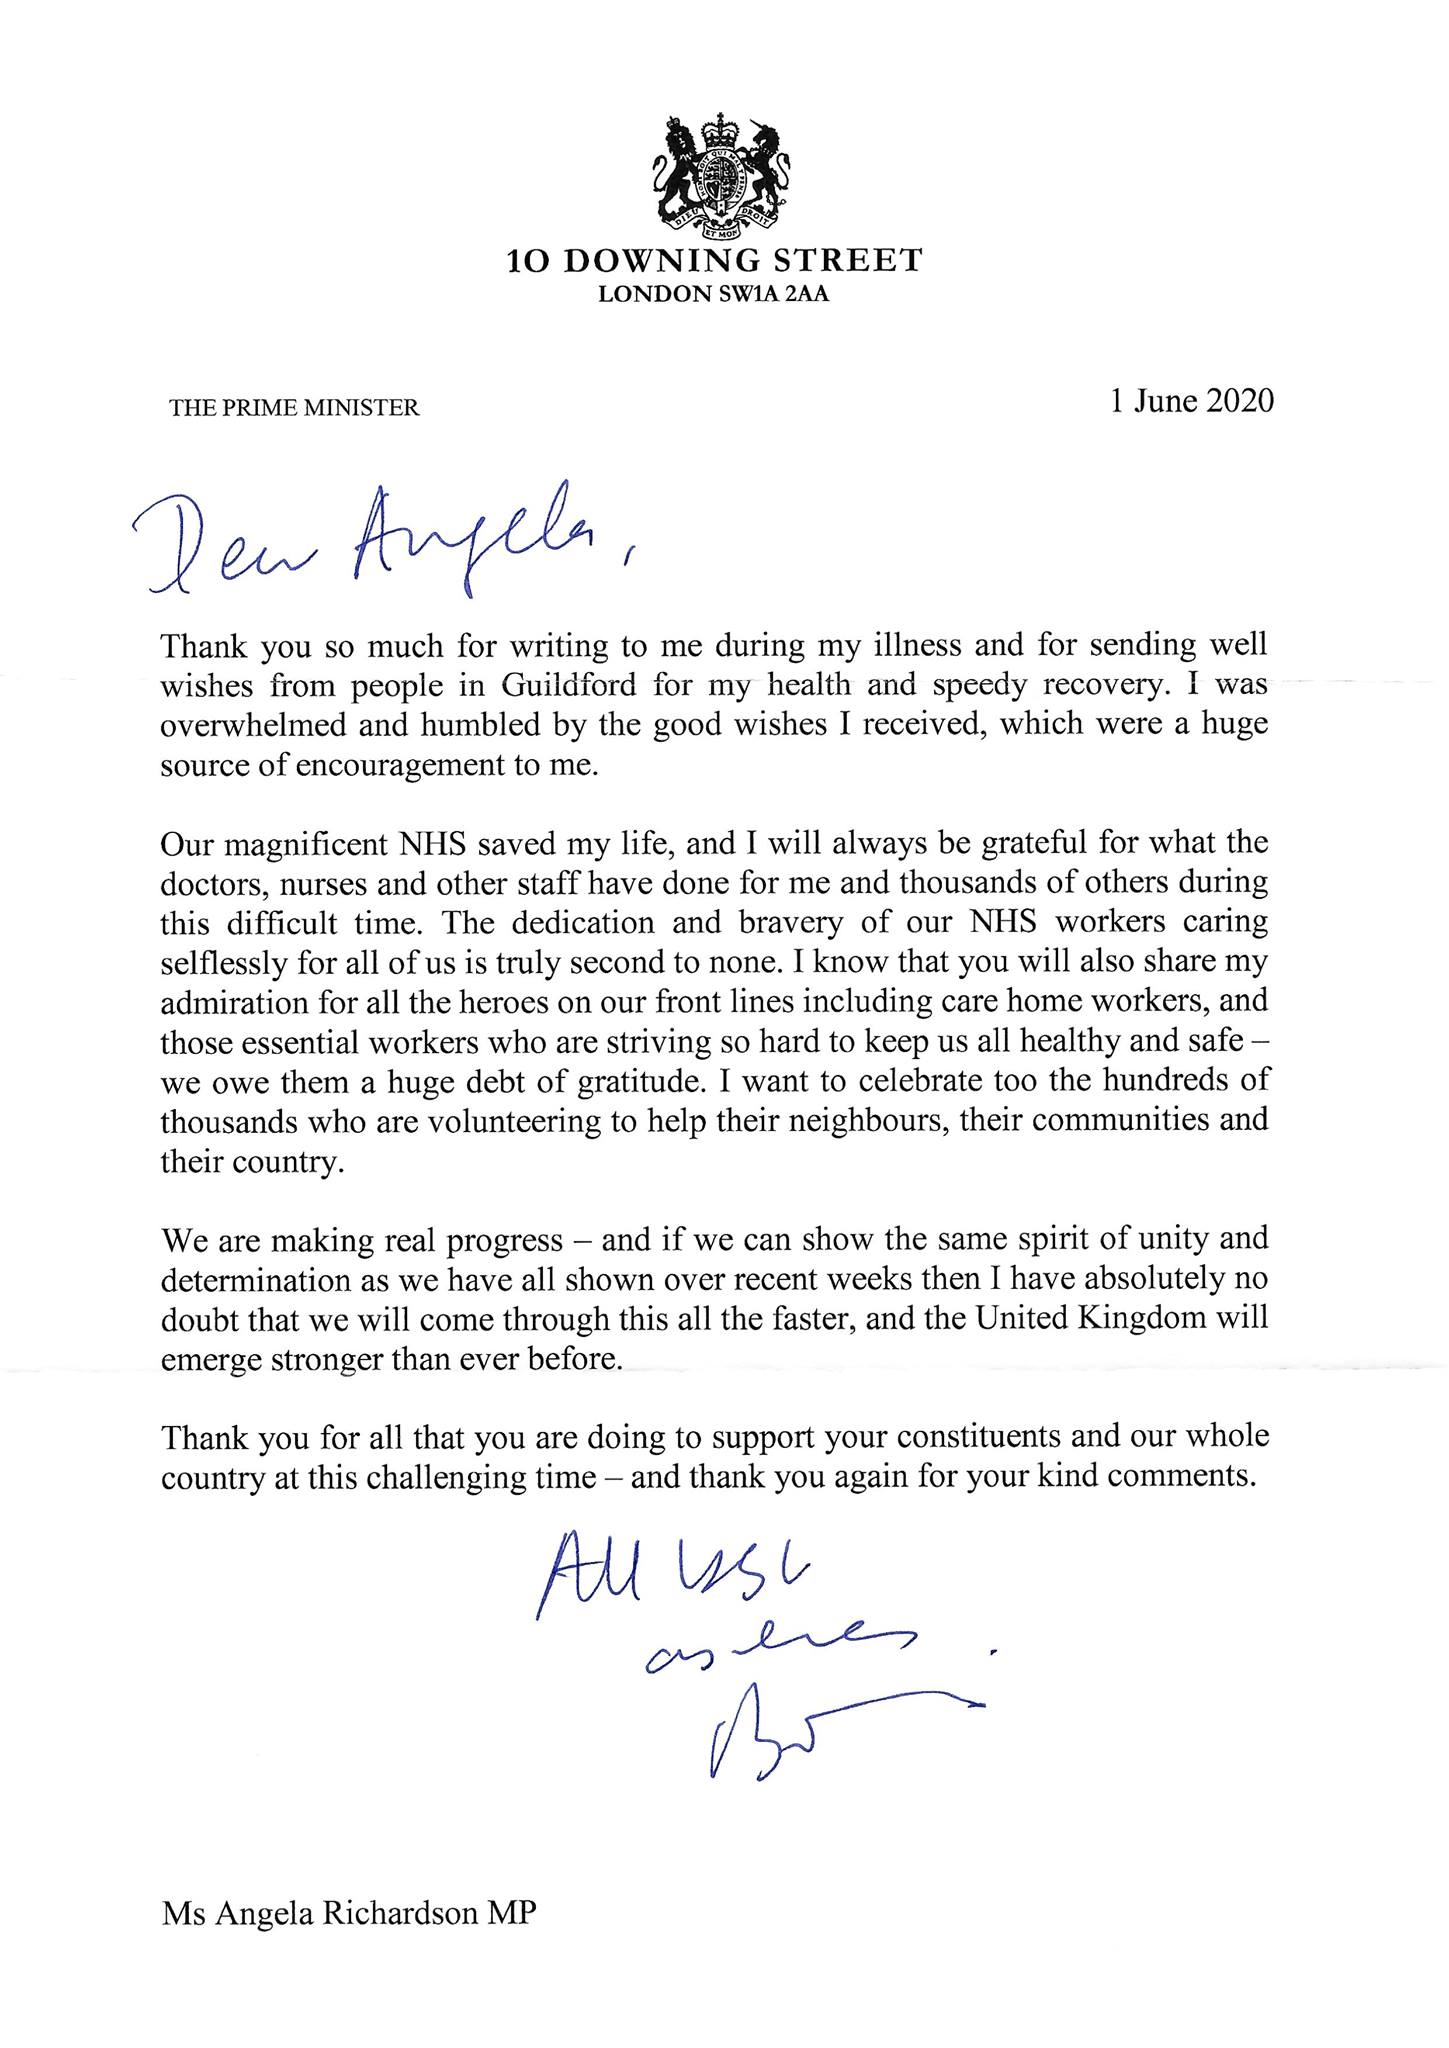 Letter Of Thanks From The Prime Minister To Guildford Well Wishers Angela Richardson